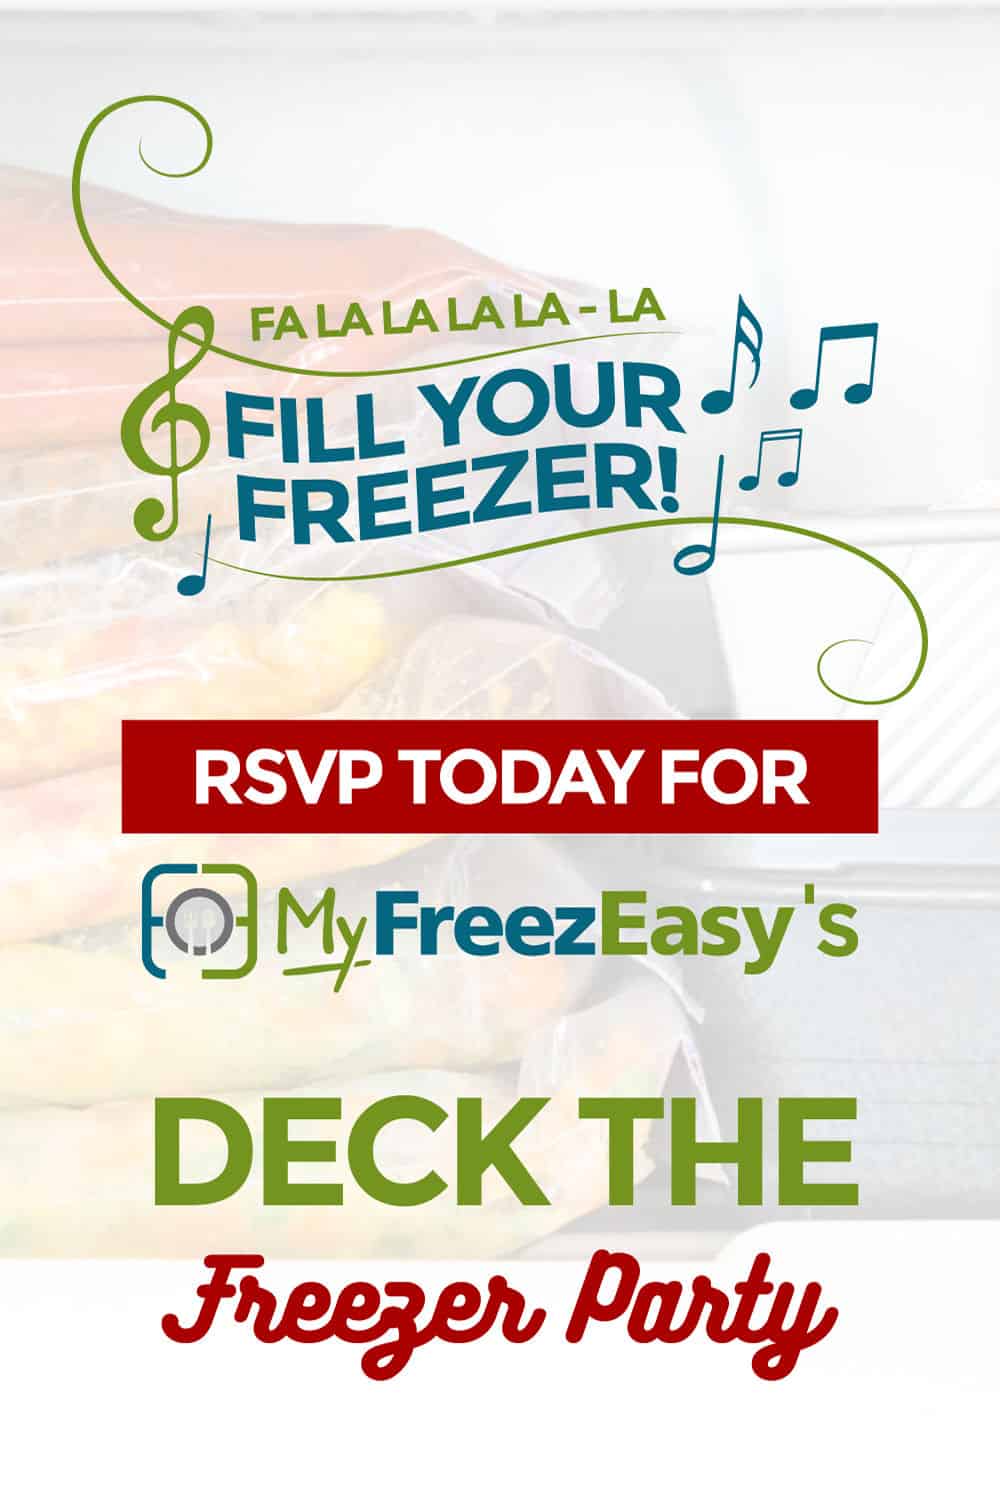 free sample freezer meal plan from myfreezeasy